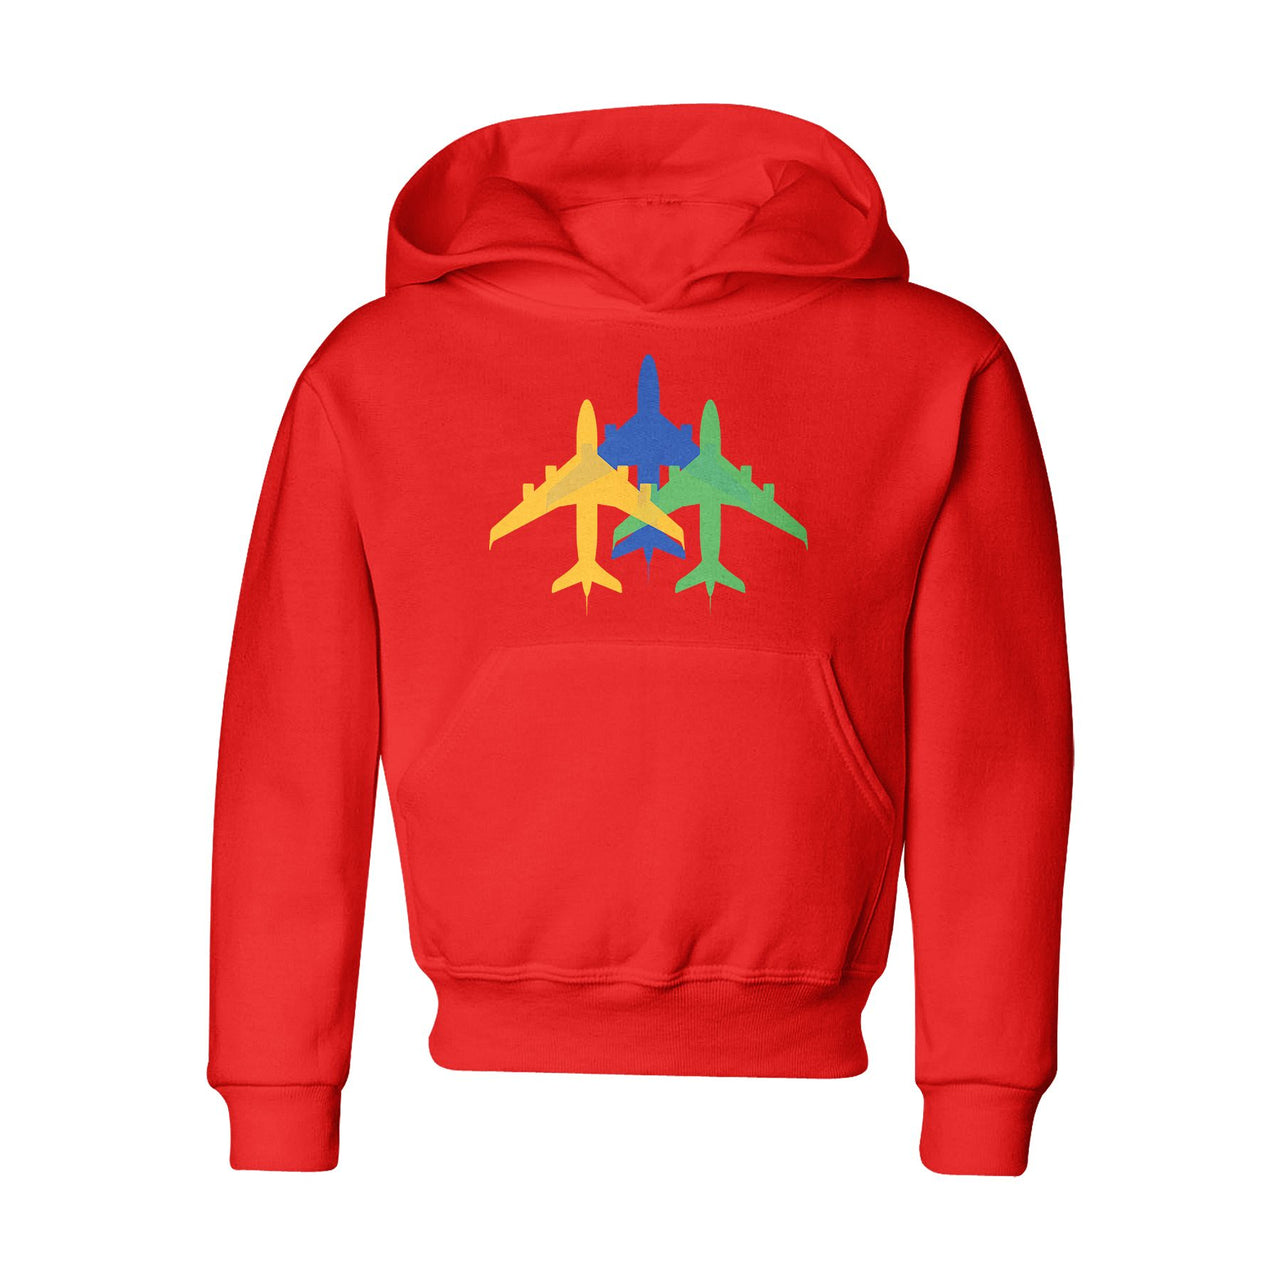 Colourful 3 Airplanes Designed "CHILDREN" Hoodies